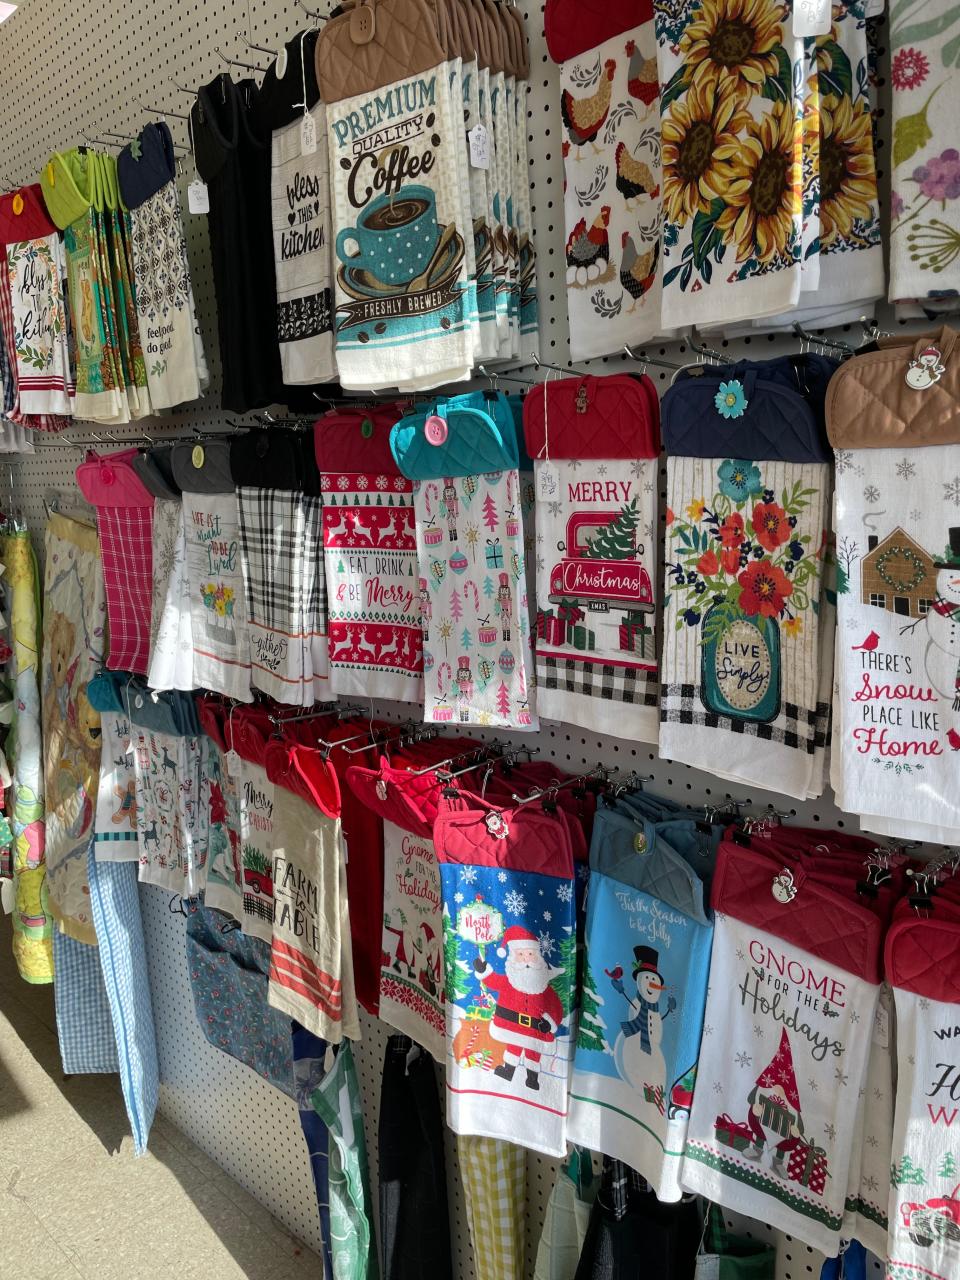 Christmas items dominated the shelves in their booth at Frugality Thrift Shop on Edgemoor Road.